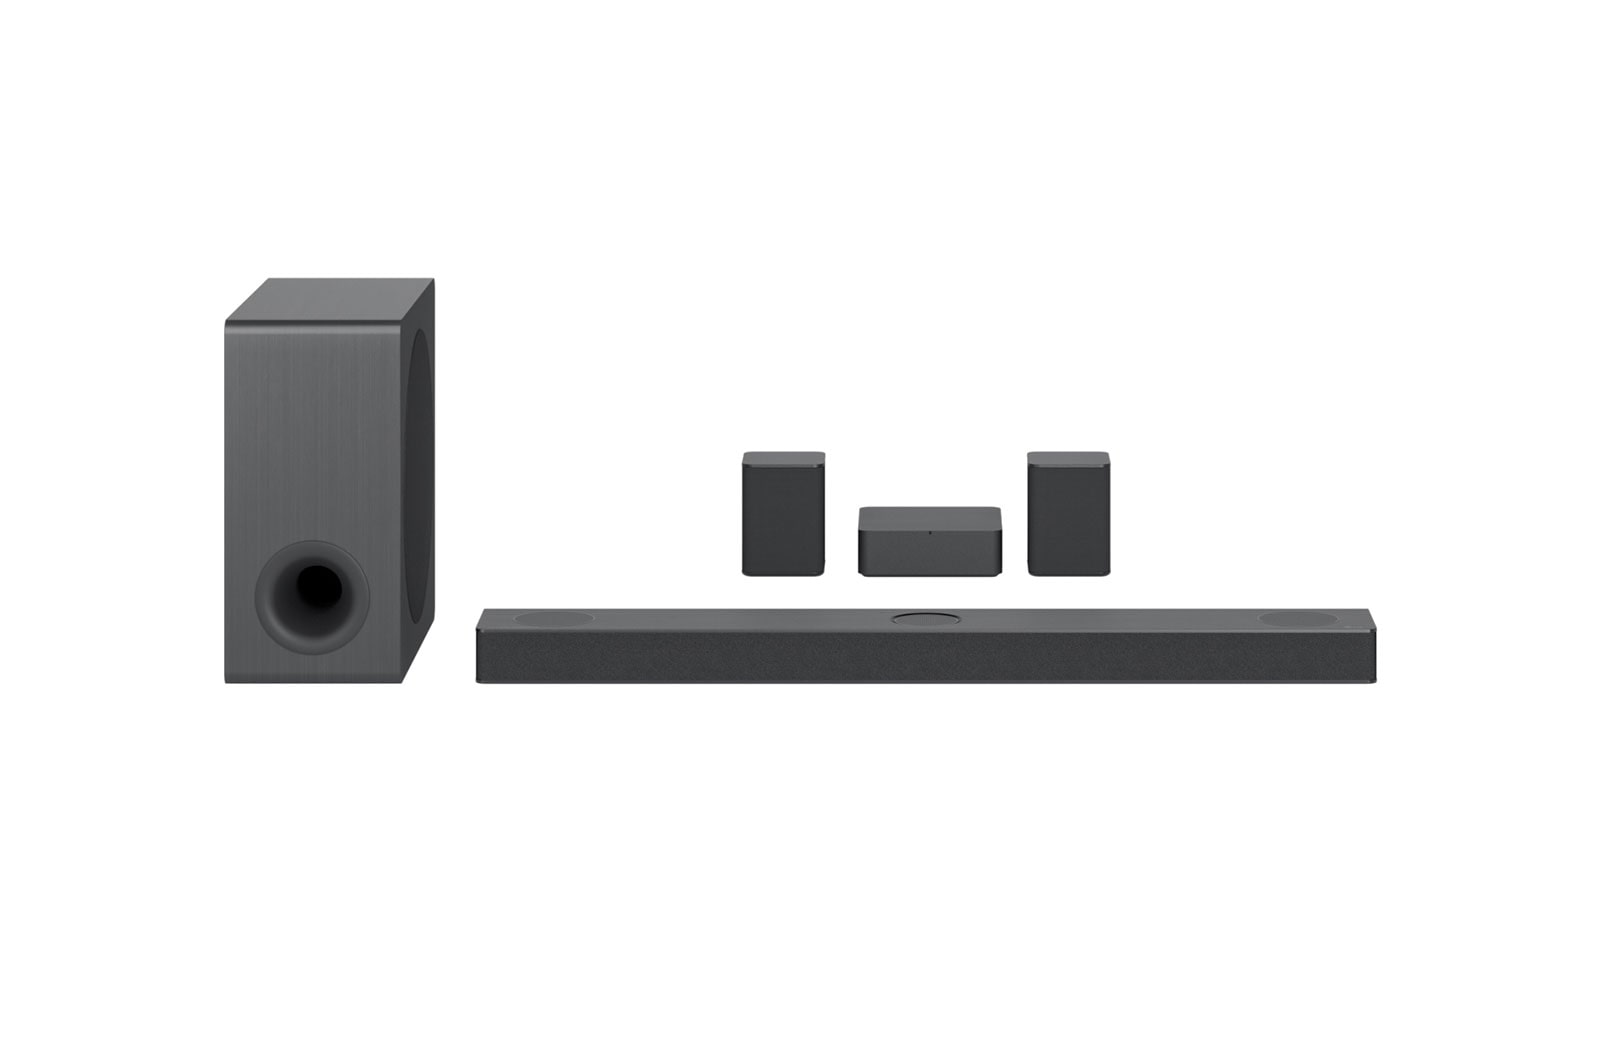  LG Sound Bar and Wireless Subwoofer S40Q - 2.1 Channel, 300  Watts Output, Home Theater Audio Black : Everything Else